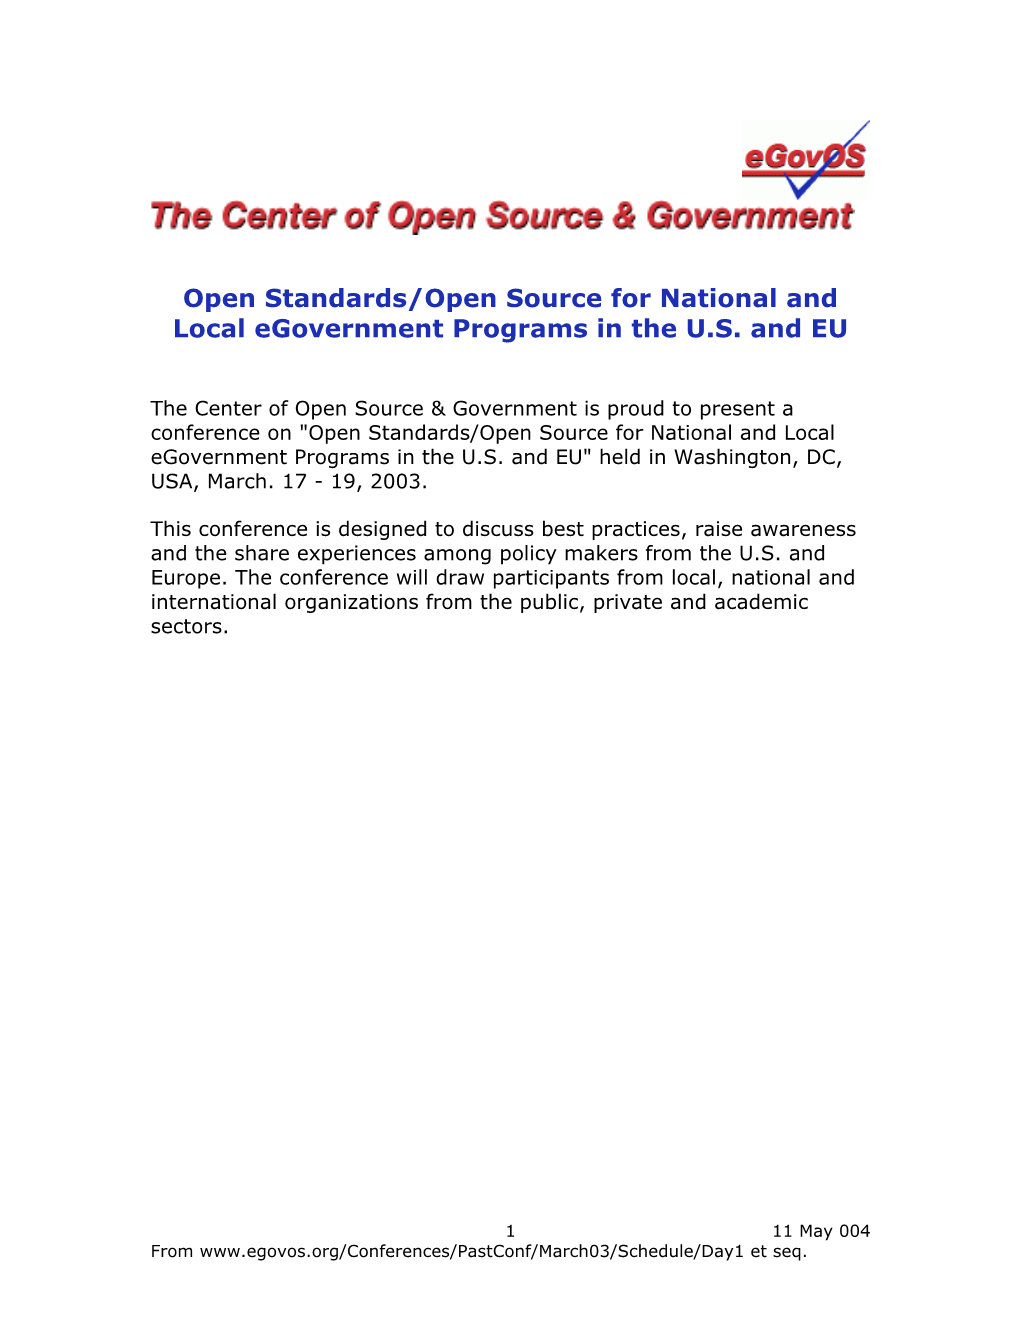 Open Standards/Open Source for National and Local Egovernment Programs in the U.S